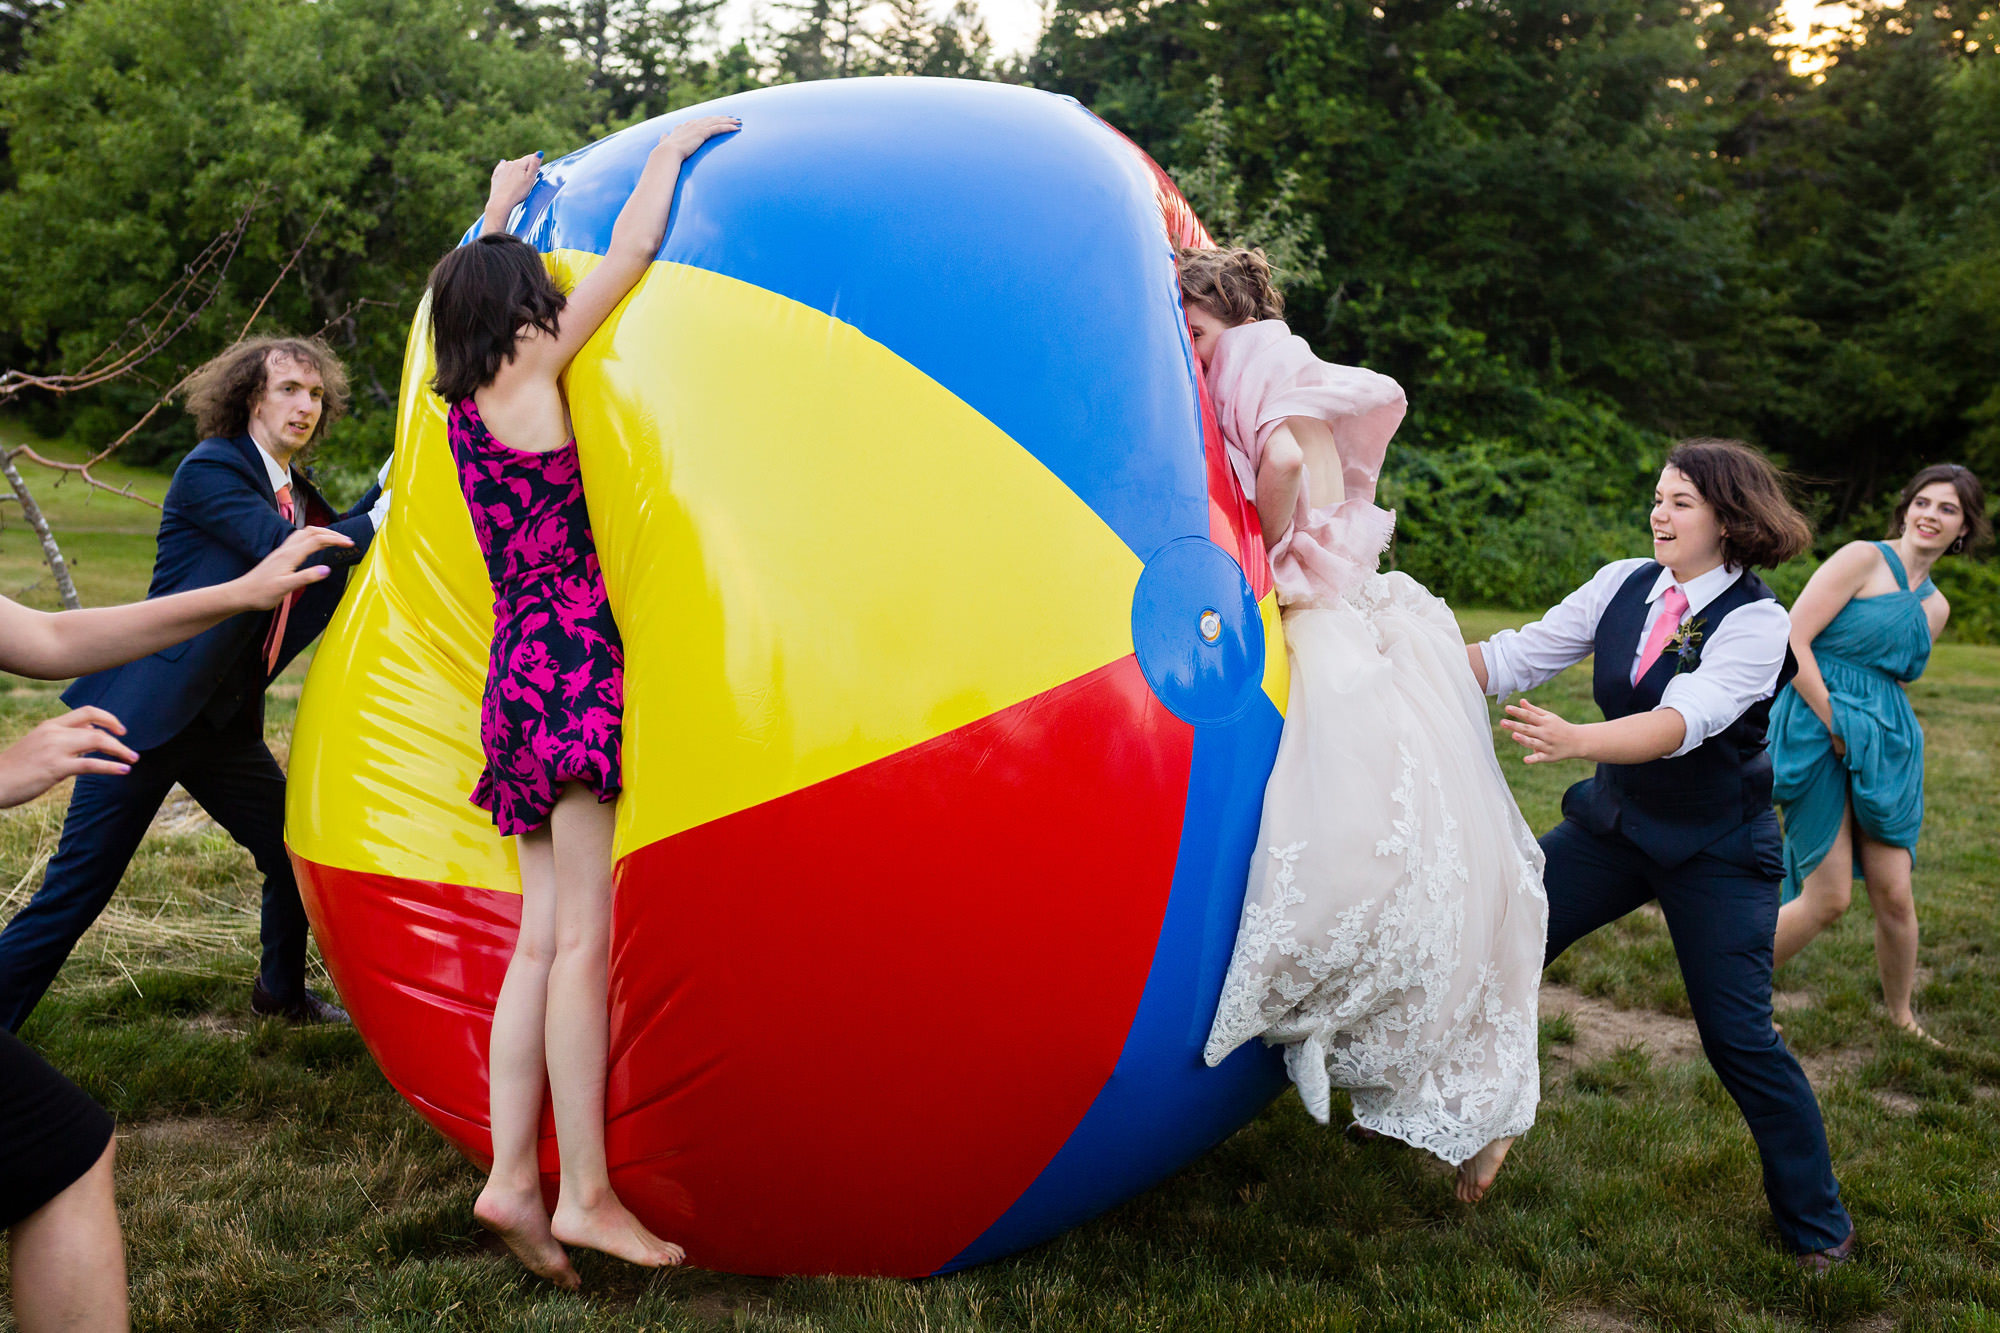 A wedding couple and their friends play with a giant beach ball during a wedding cocktail hour.